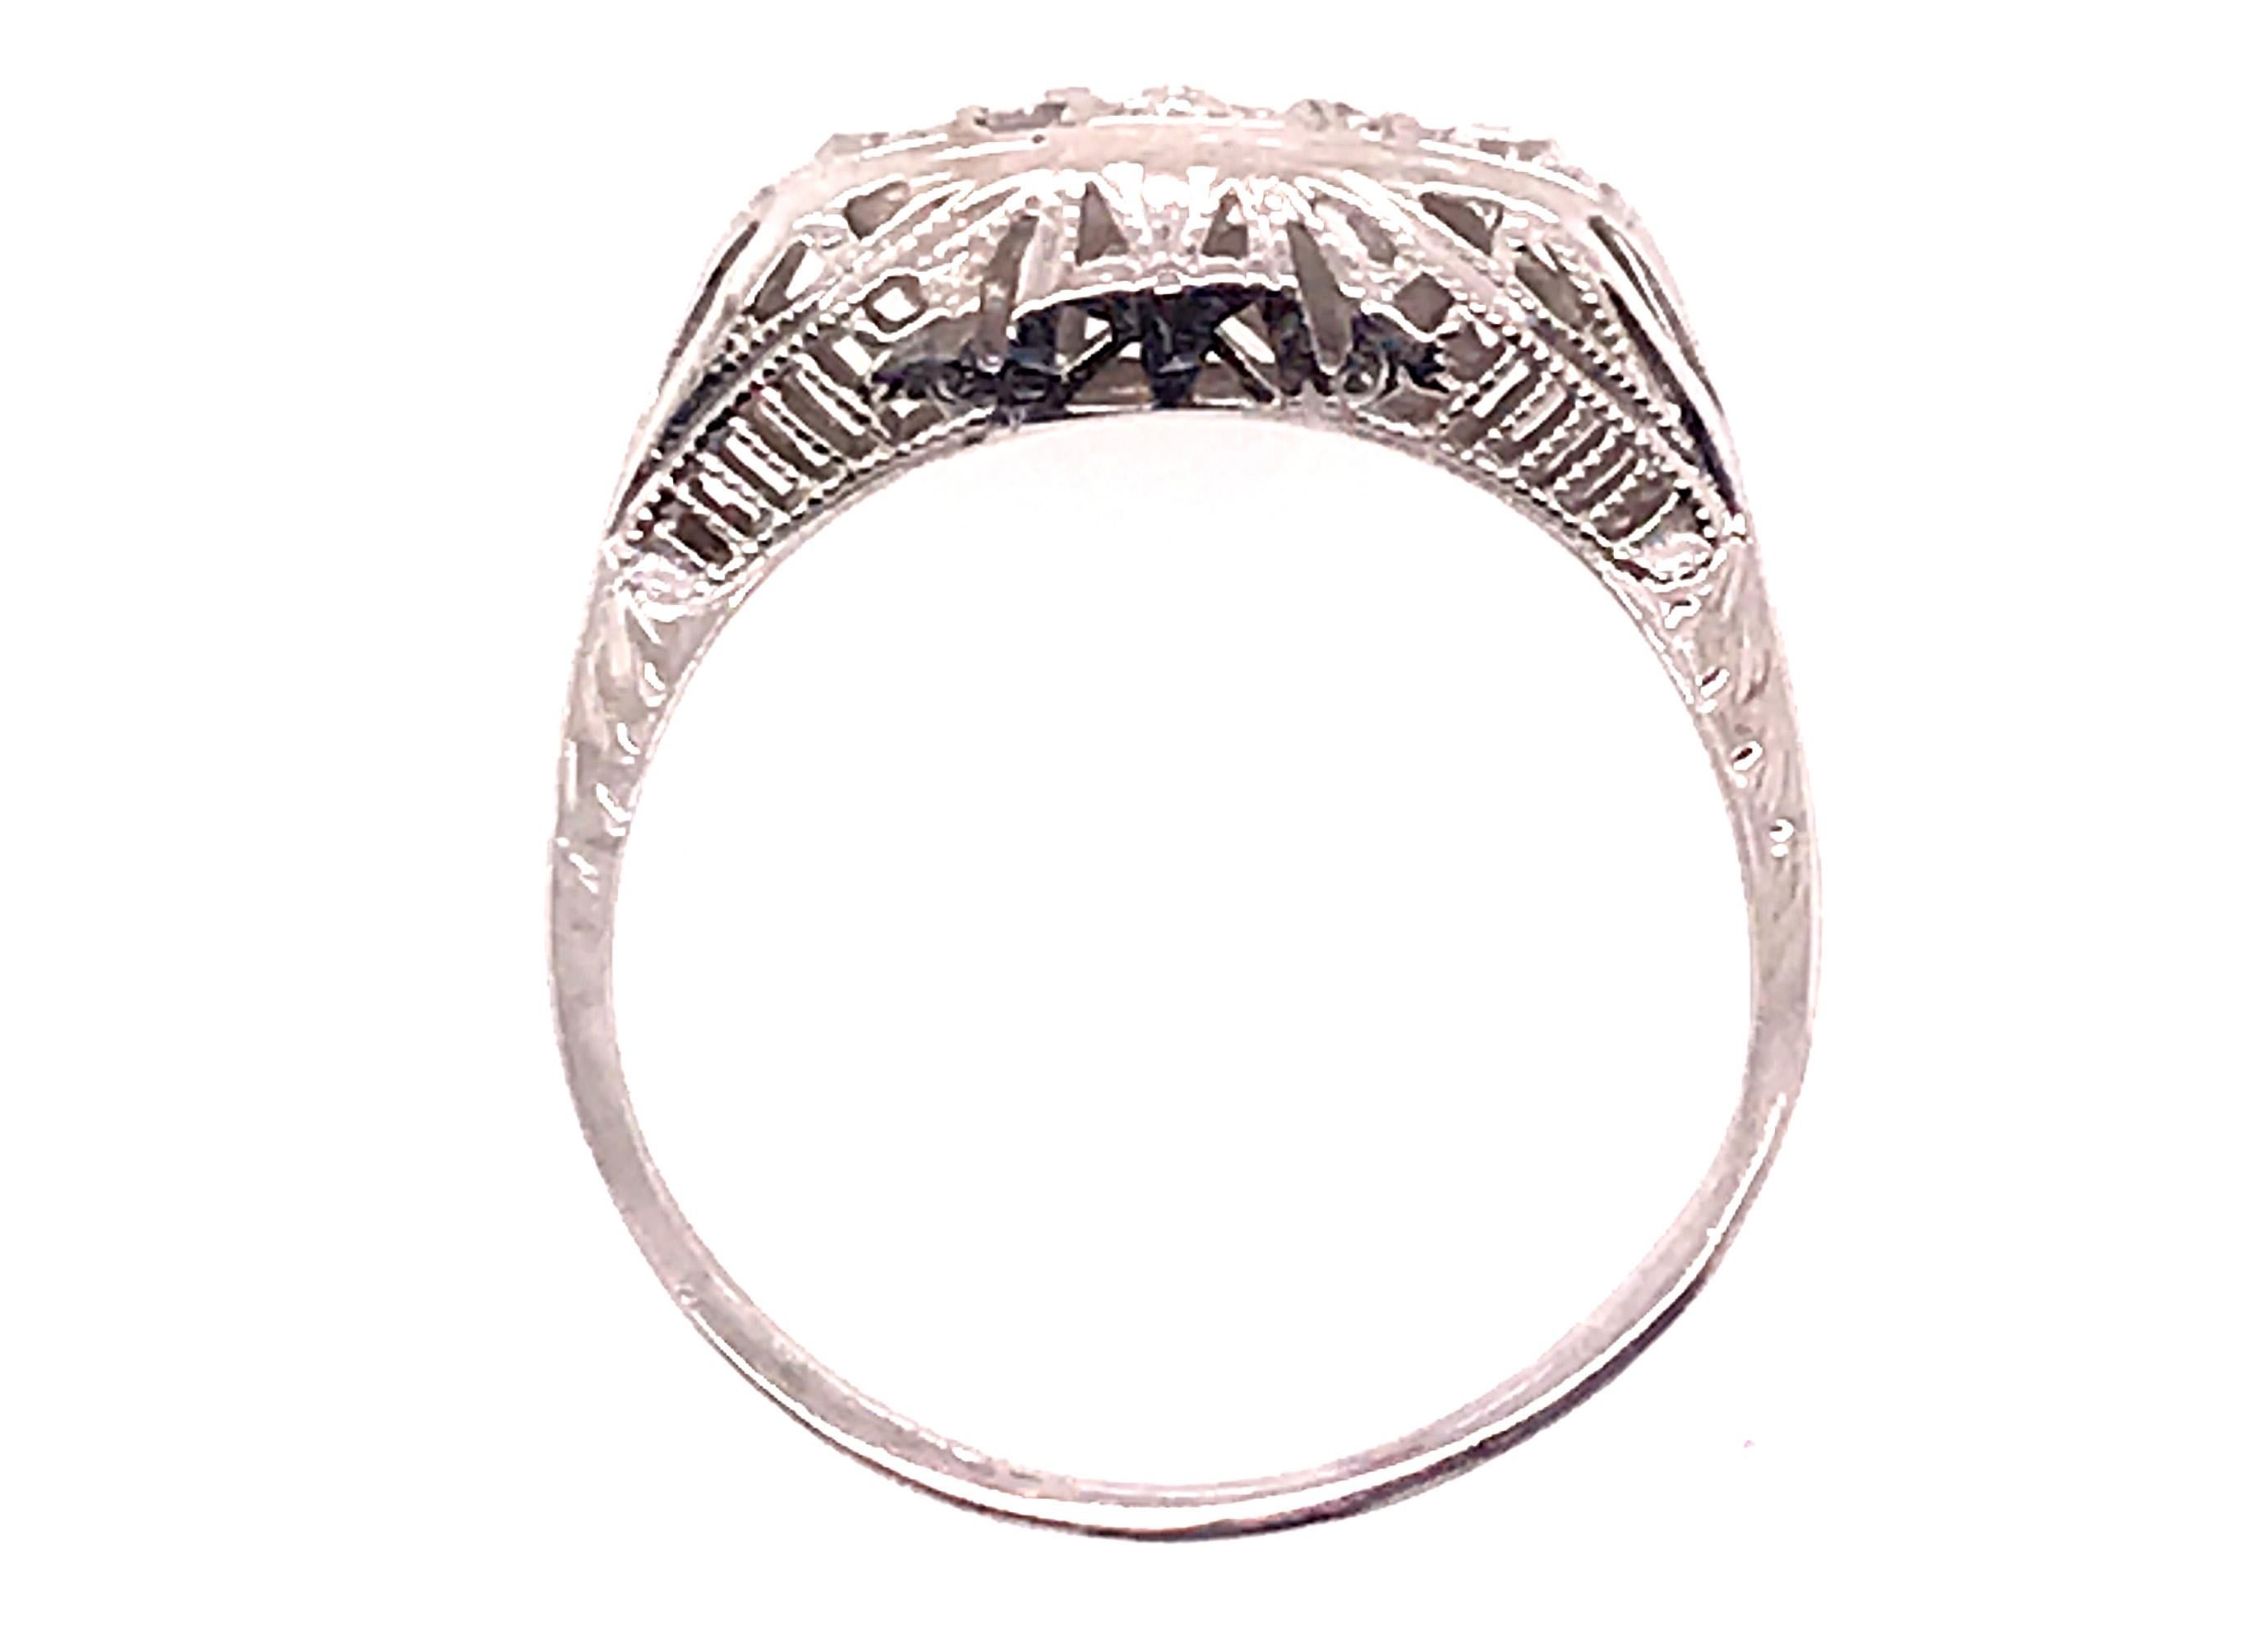 Genuine Original Antique from 1920's-1930's Vintage 3 Stone Diamond Cocktail Filigree Ring .25ct 18K Art Deco 


Features 3 Genuine Antique Old European Cut Center Diamonds

Antique Vintage Style with Elegance 

Beautiful Hand Carved Filigree and